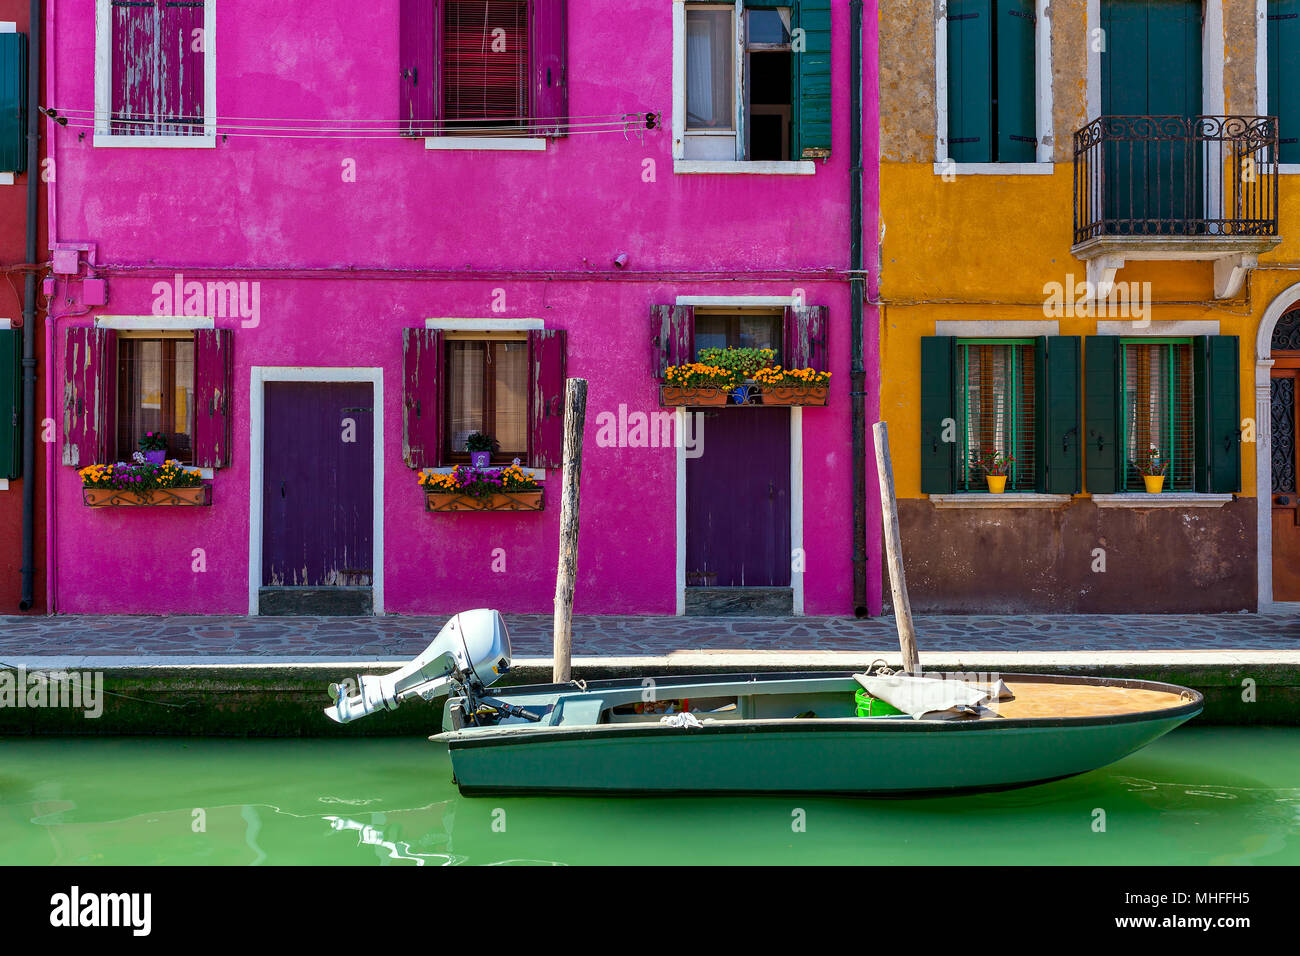 Boat on narrow canal in front of colorful houses of Burano, Italy. Stock Photo